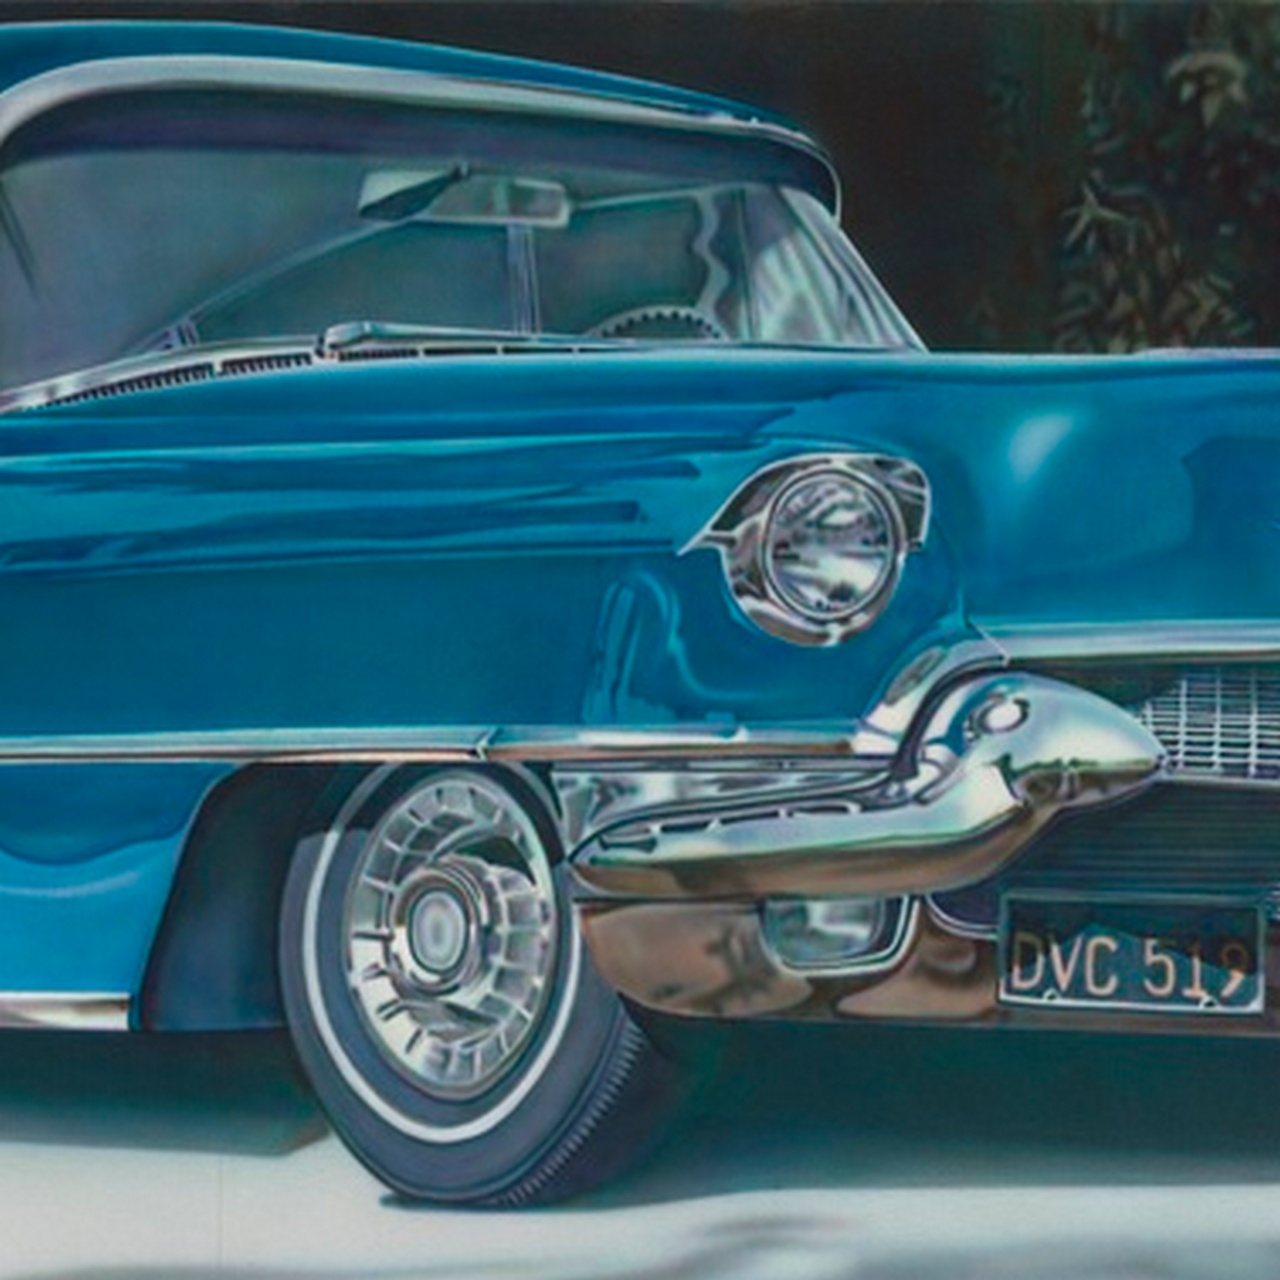 Don Eddy Blue Caddy 1971 coll Centraal Museum detail 1280